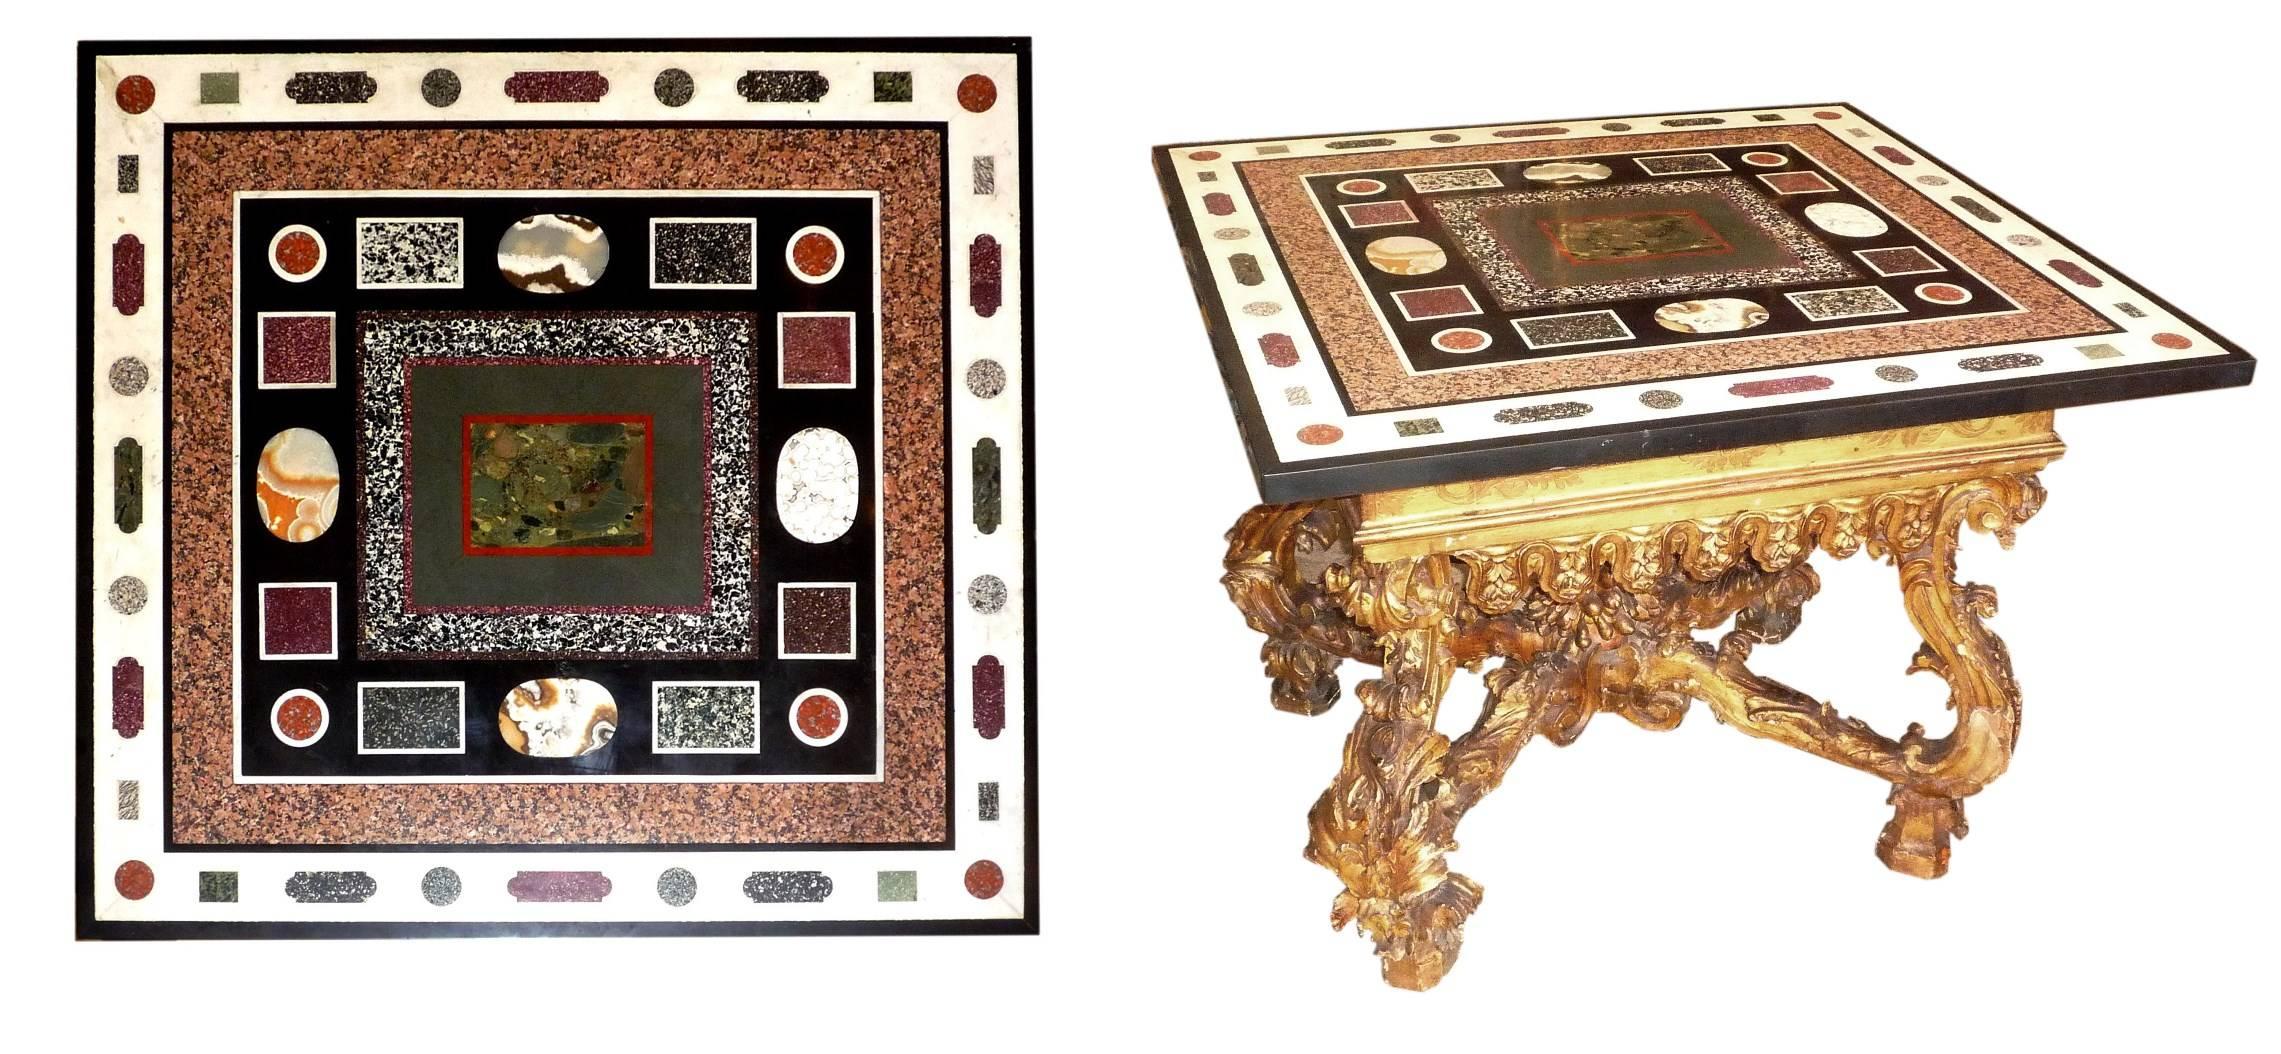 A fine Roman 19th century Pietra Dura panel, composed of red Egyptian porphyry, gray porphyry, agate, pink granite, on a black and white marble background. The table Roman Baroque in carved and giltwood, dating from the beginning of the 18th